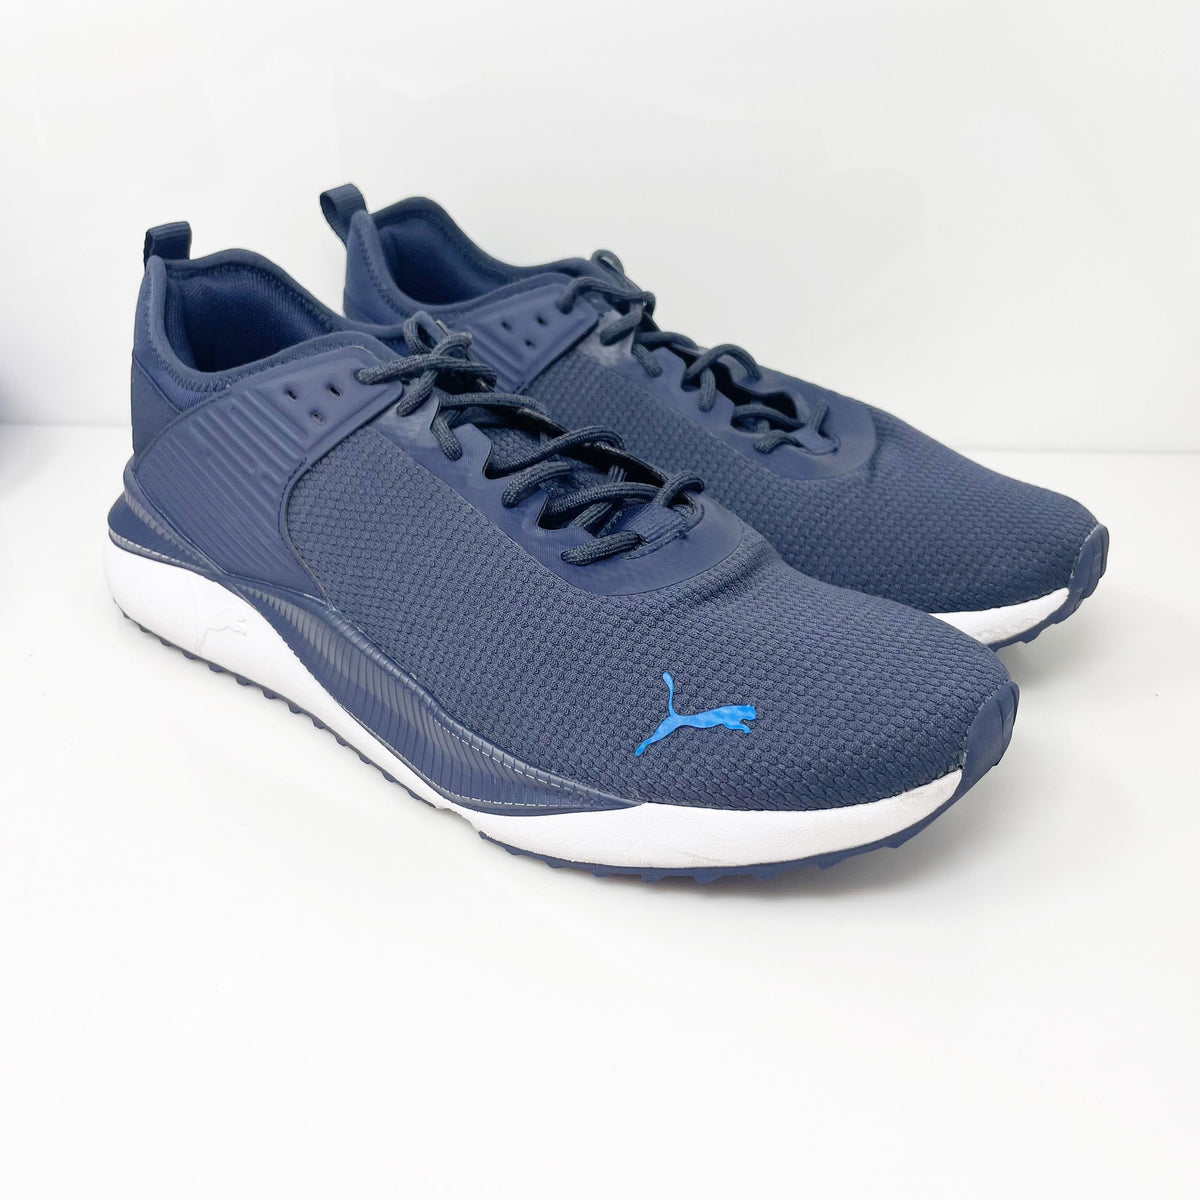 Puma Mens PC Runner 392052-02 Blue Running Shoes Sneakers Size 12 